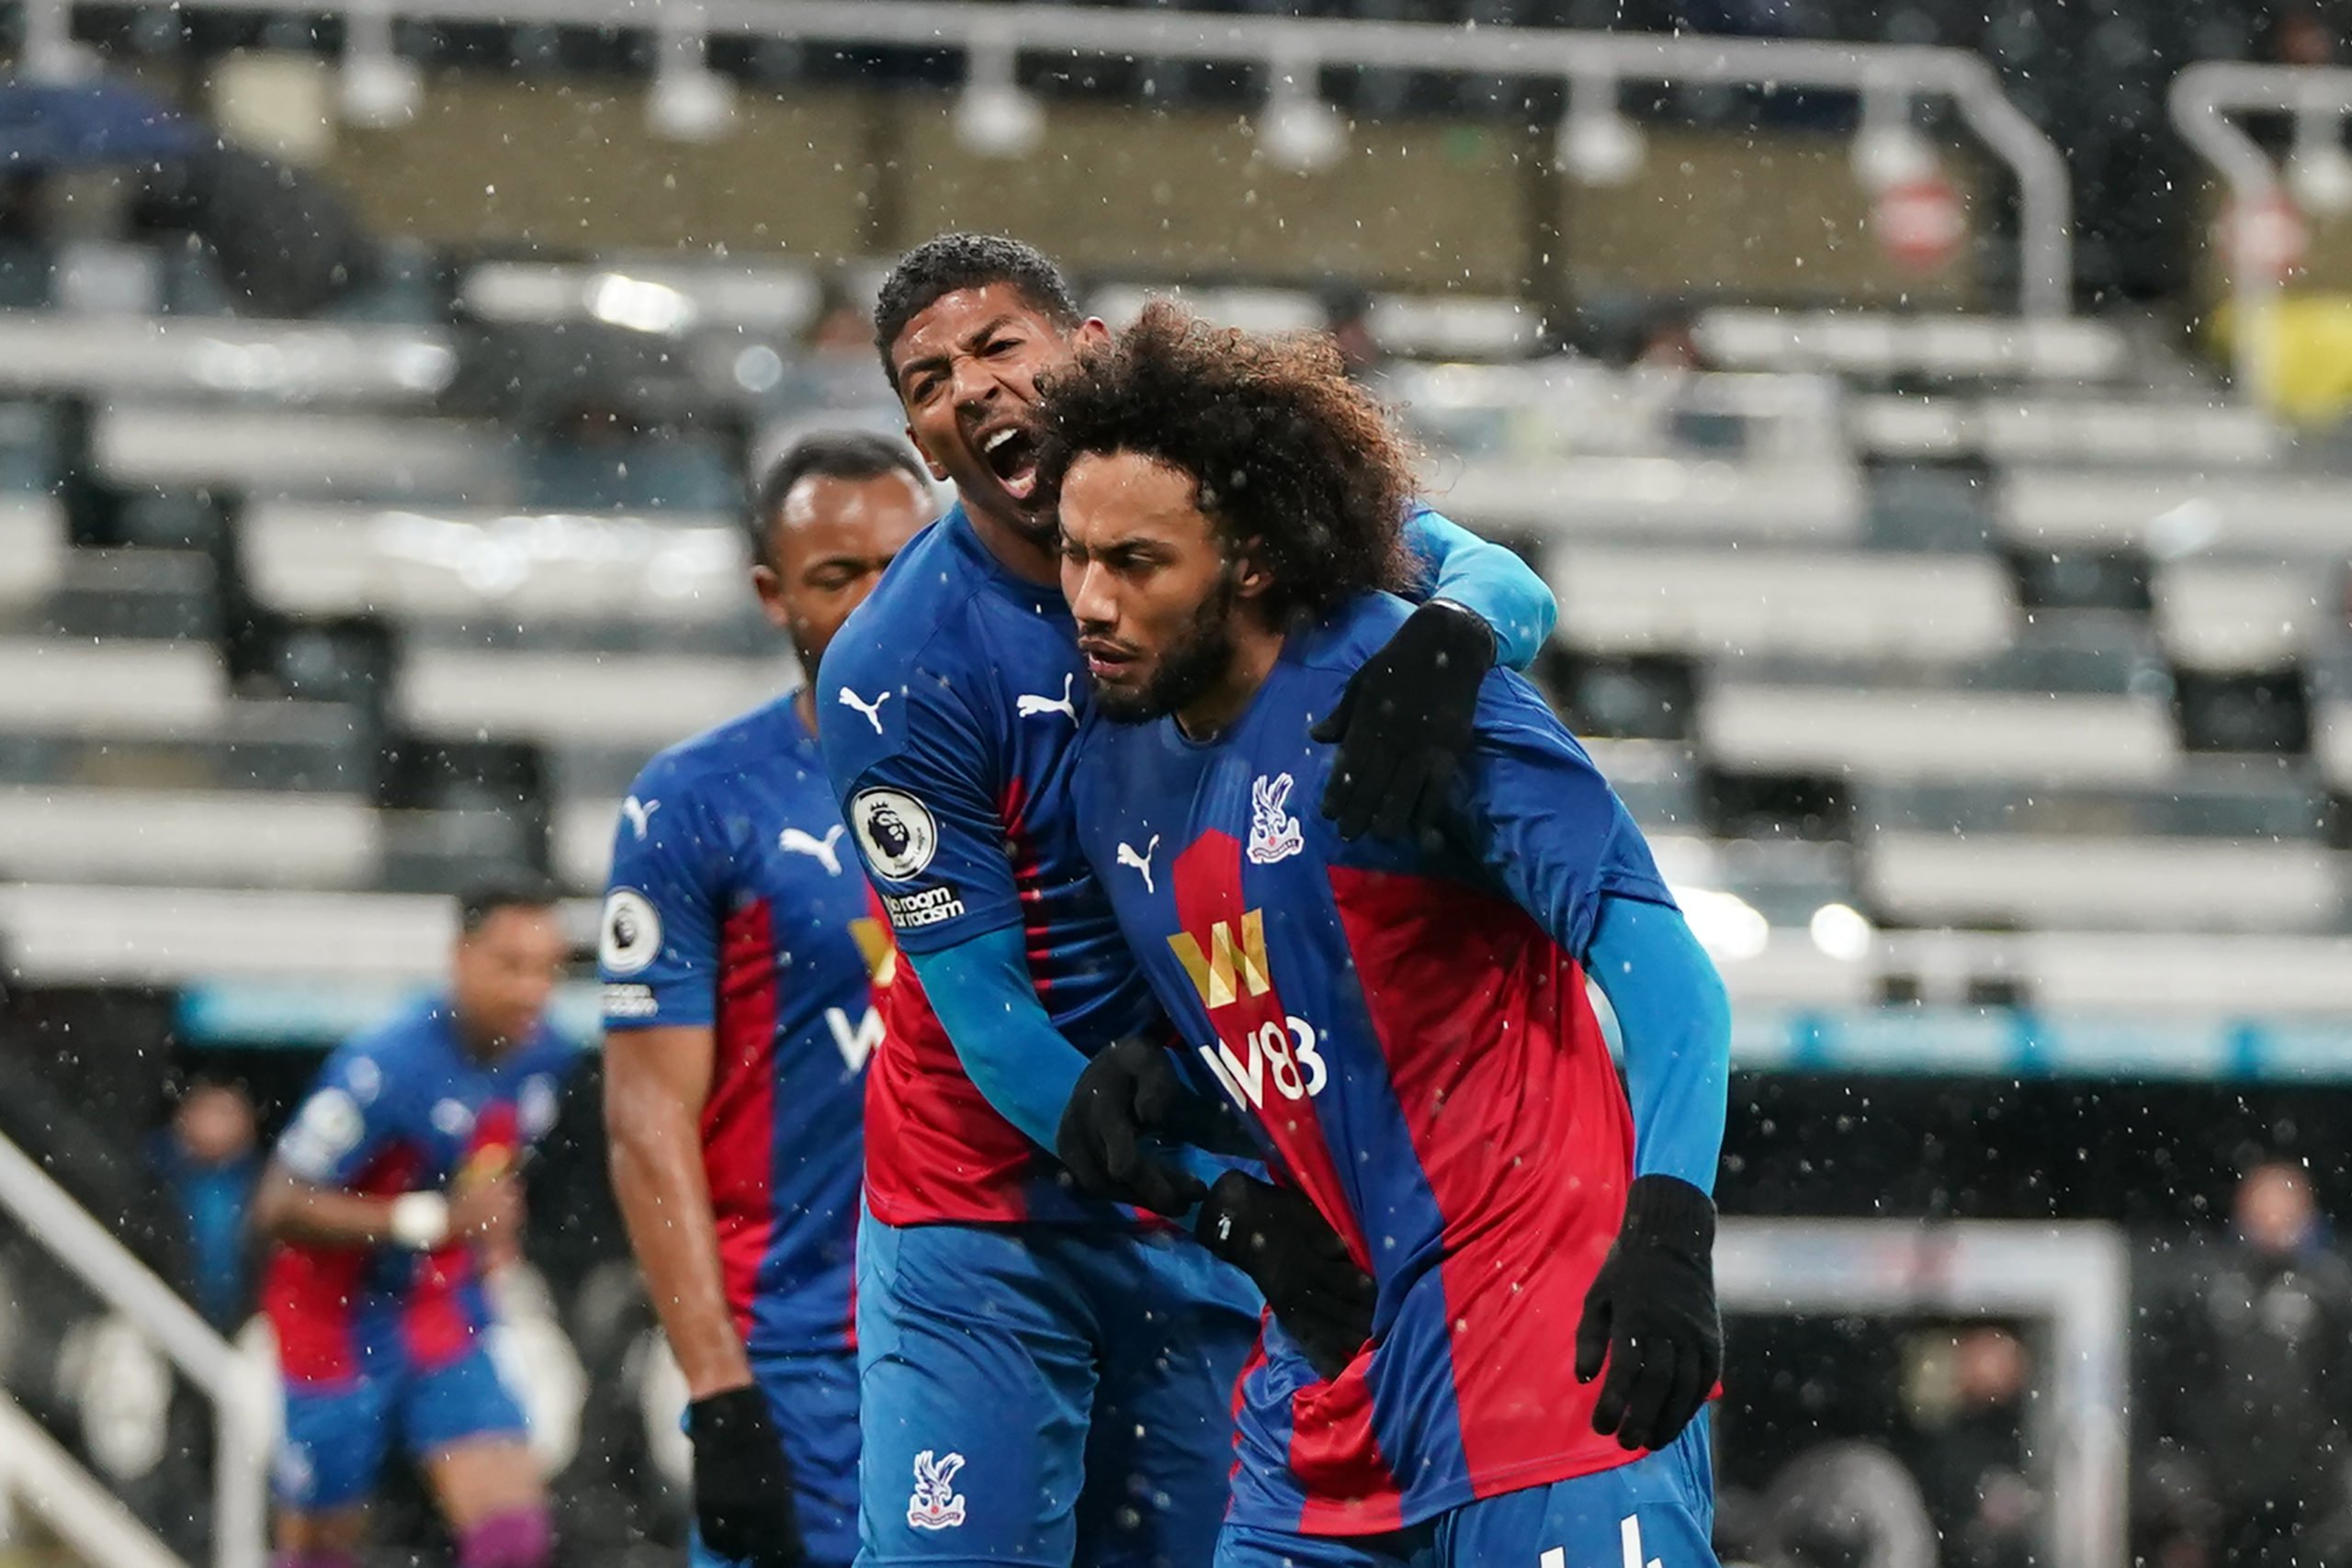 Crystal Palace's Riedewald extends his stay at Selhurst Park (Riedewald is celebrating in the photo)